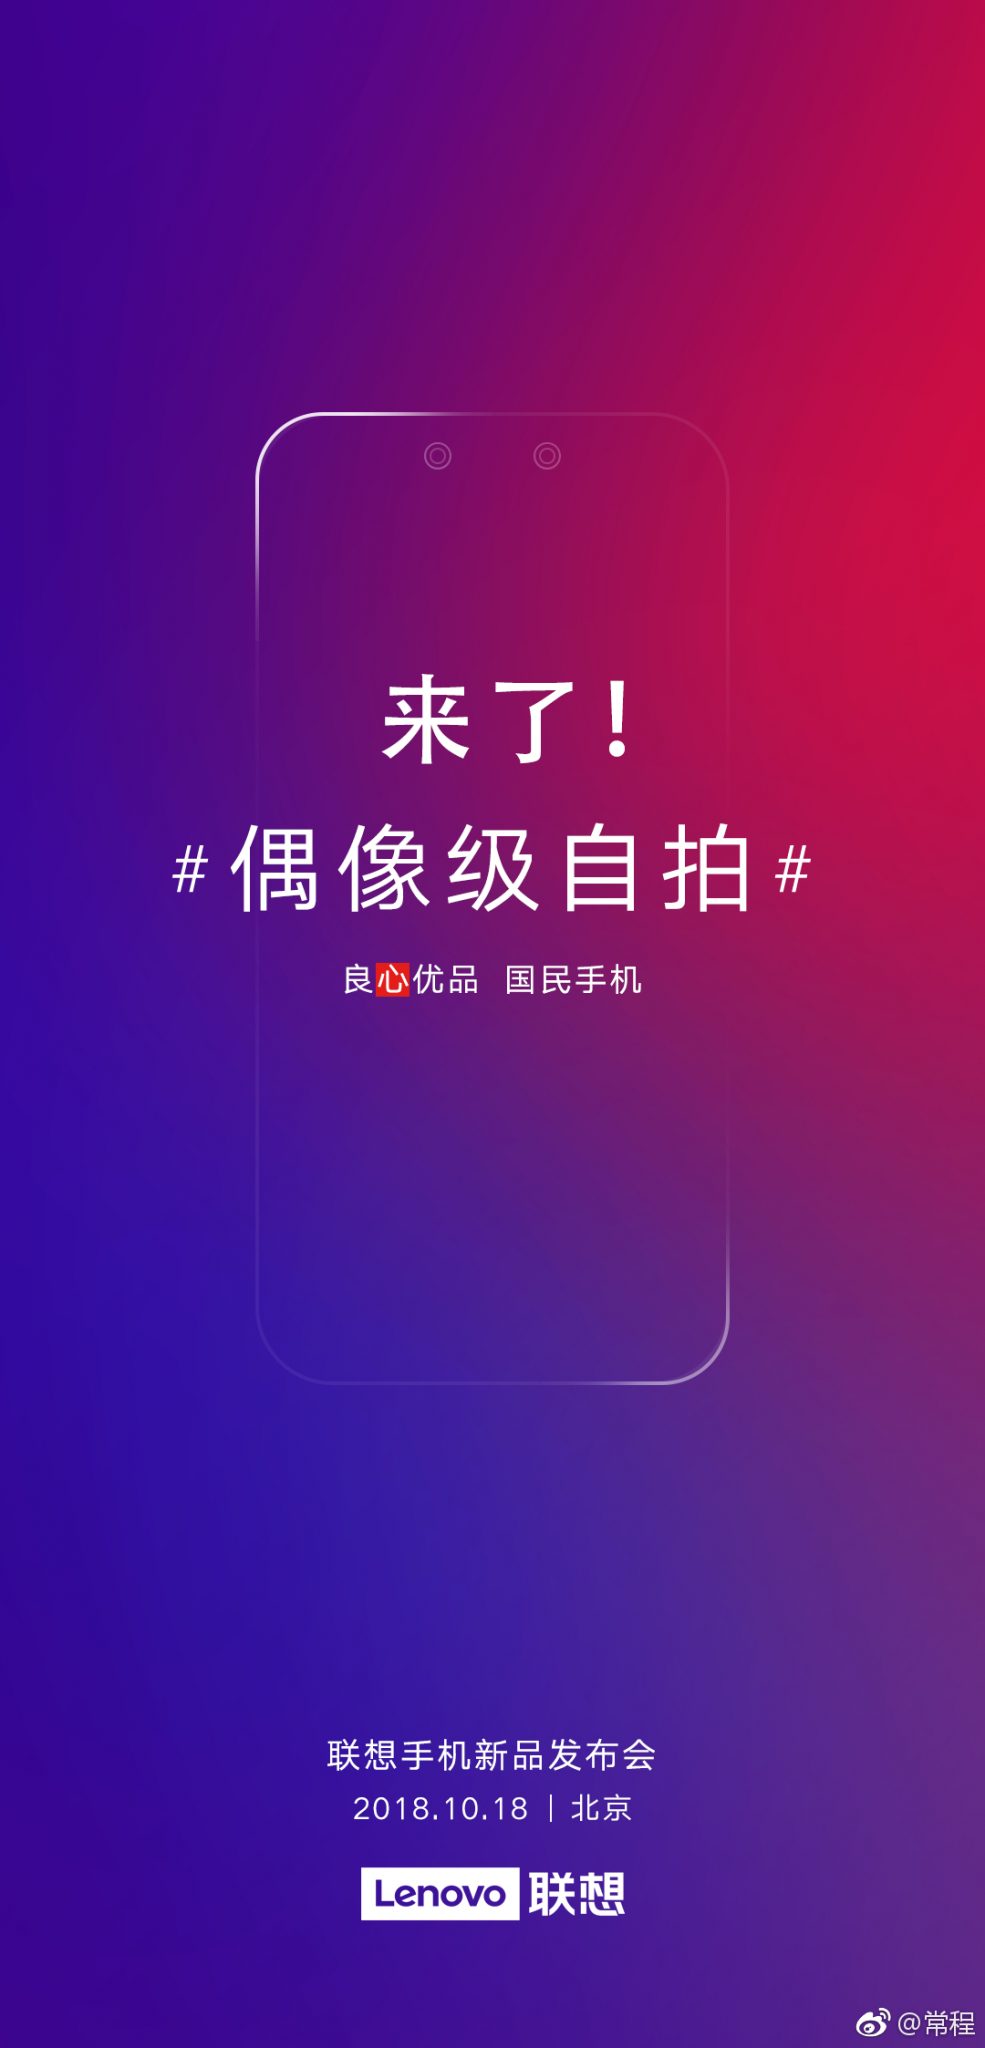 Lenovo S5 Pro is launching on October 18